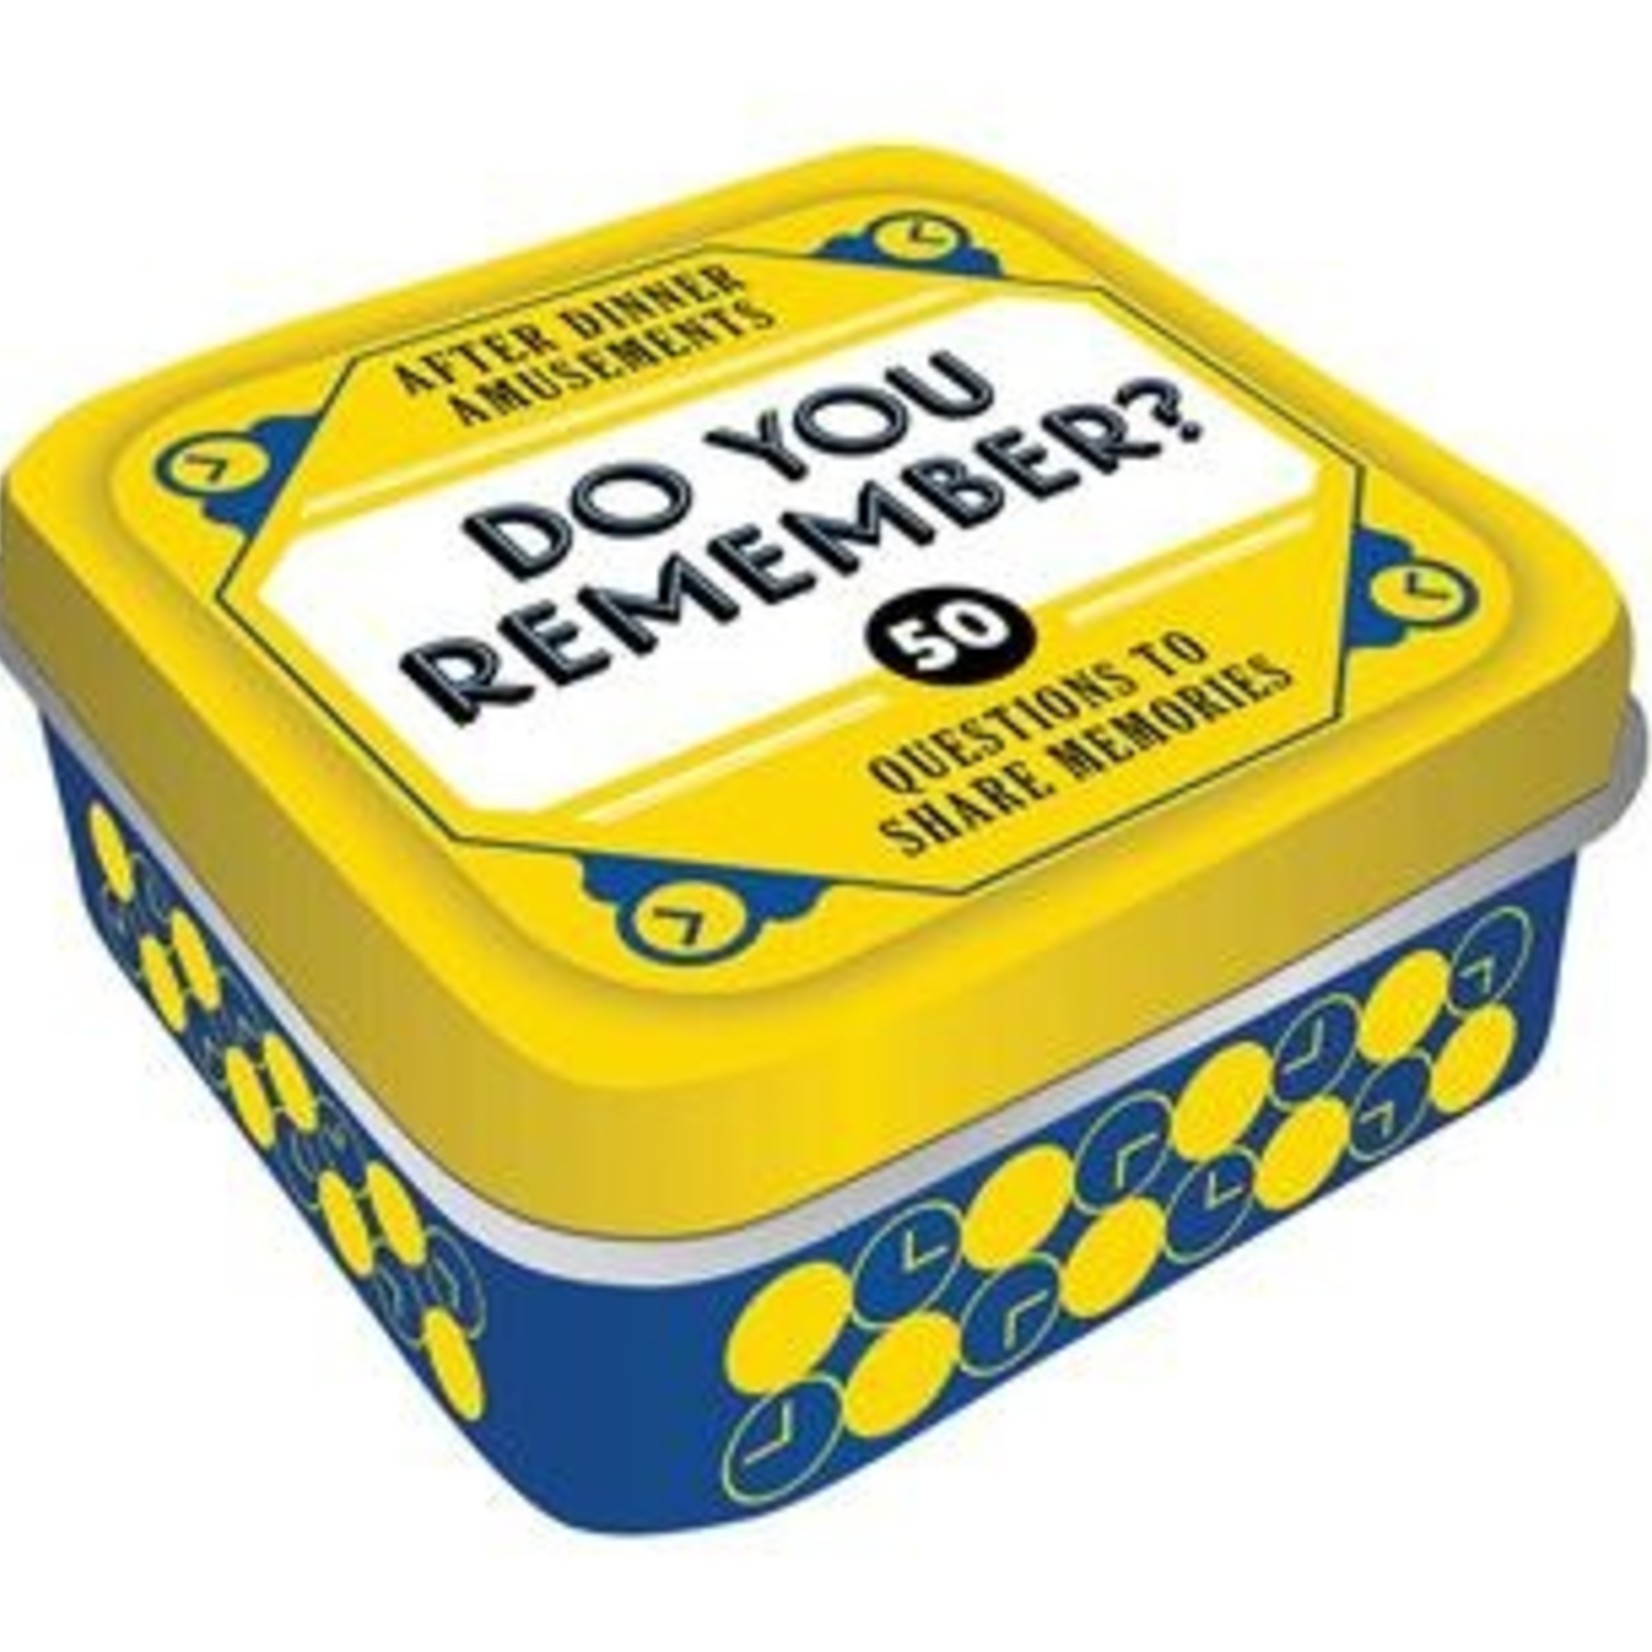 Game Tins - Do You Remember?